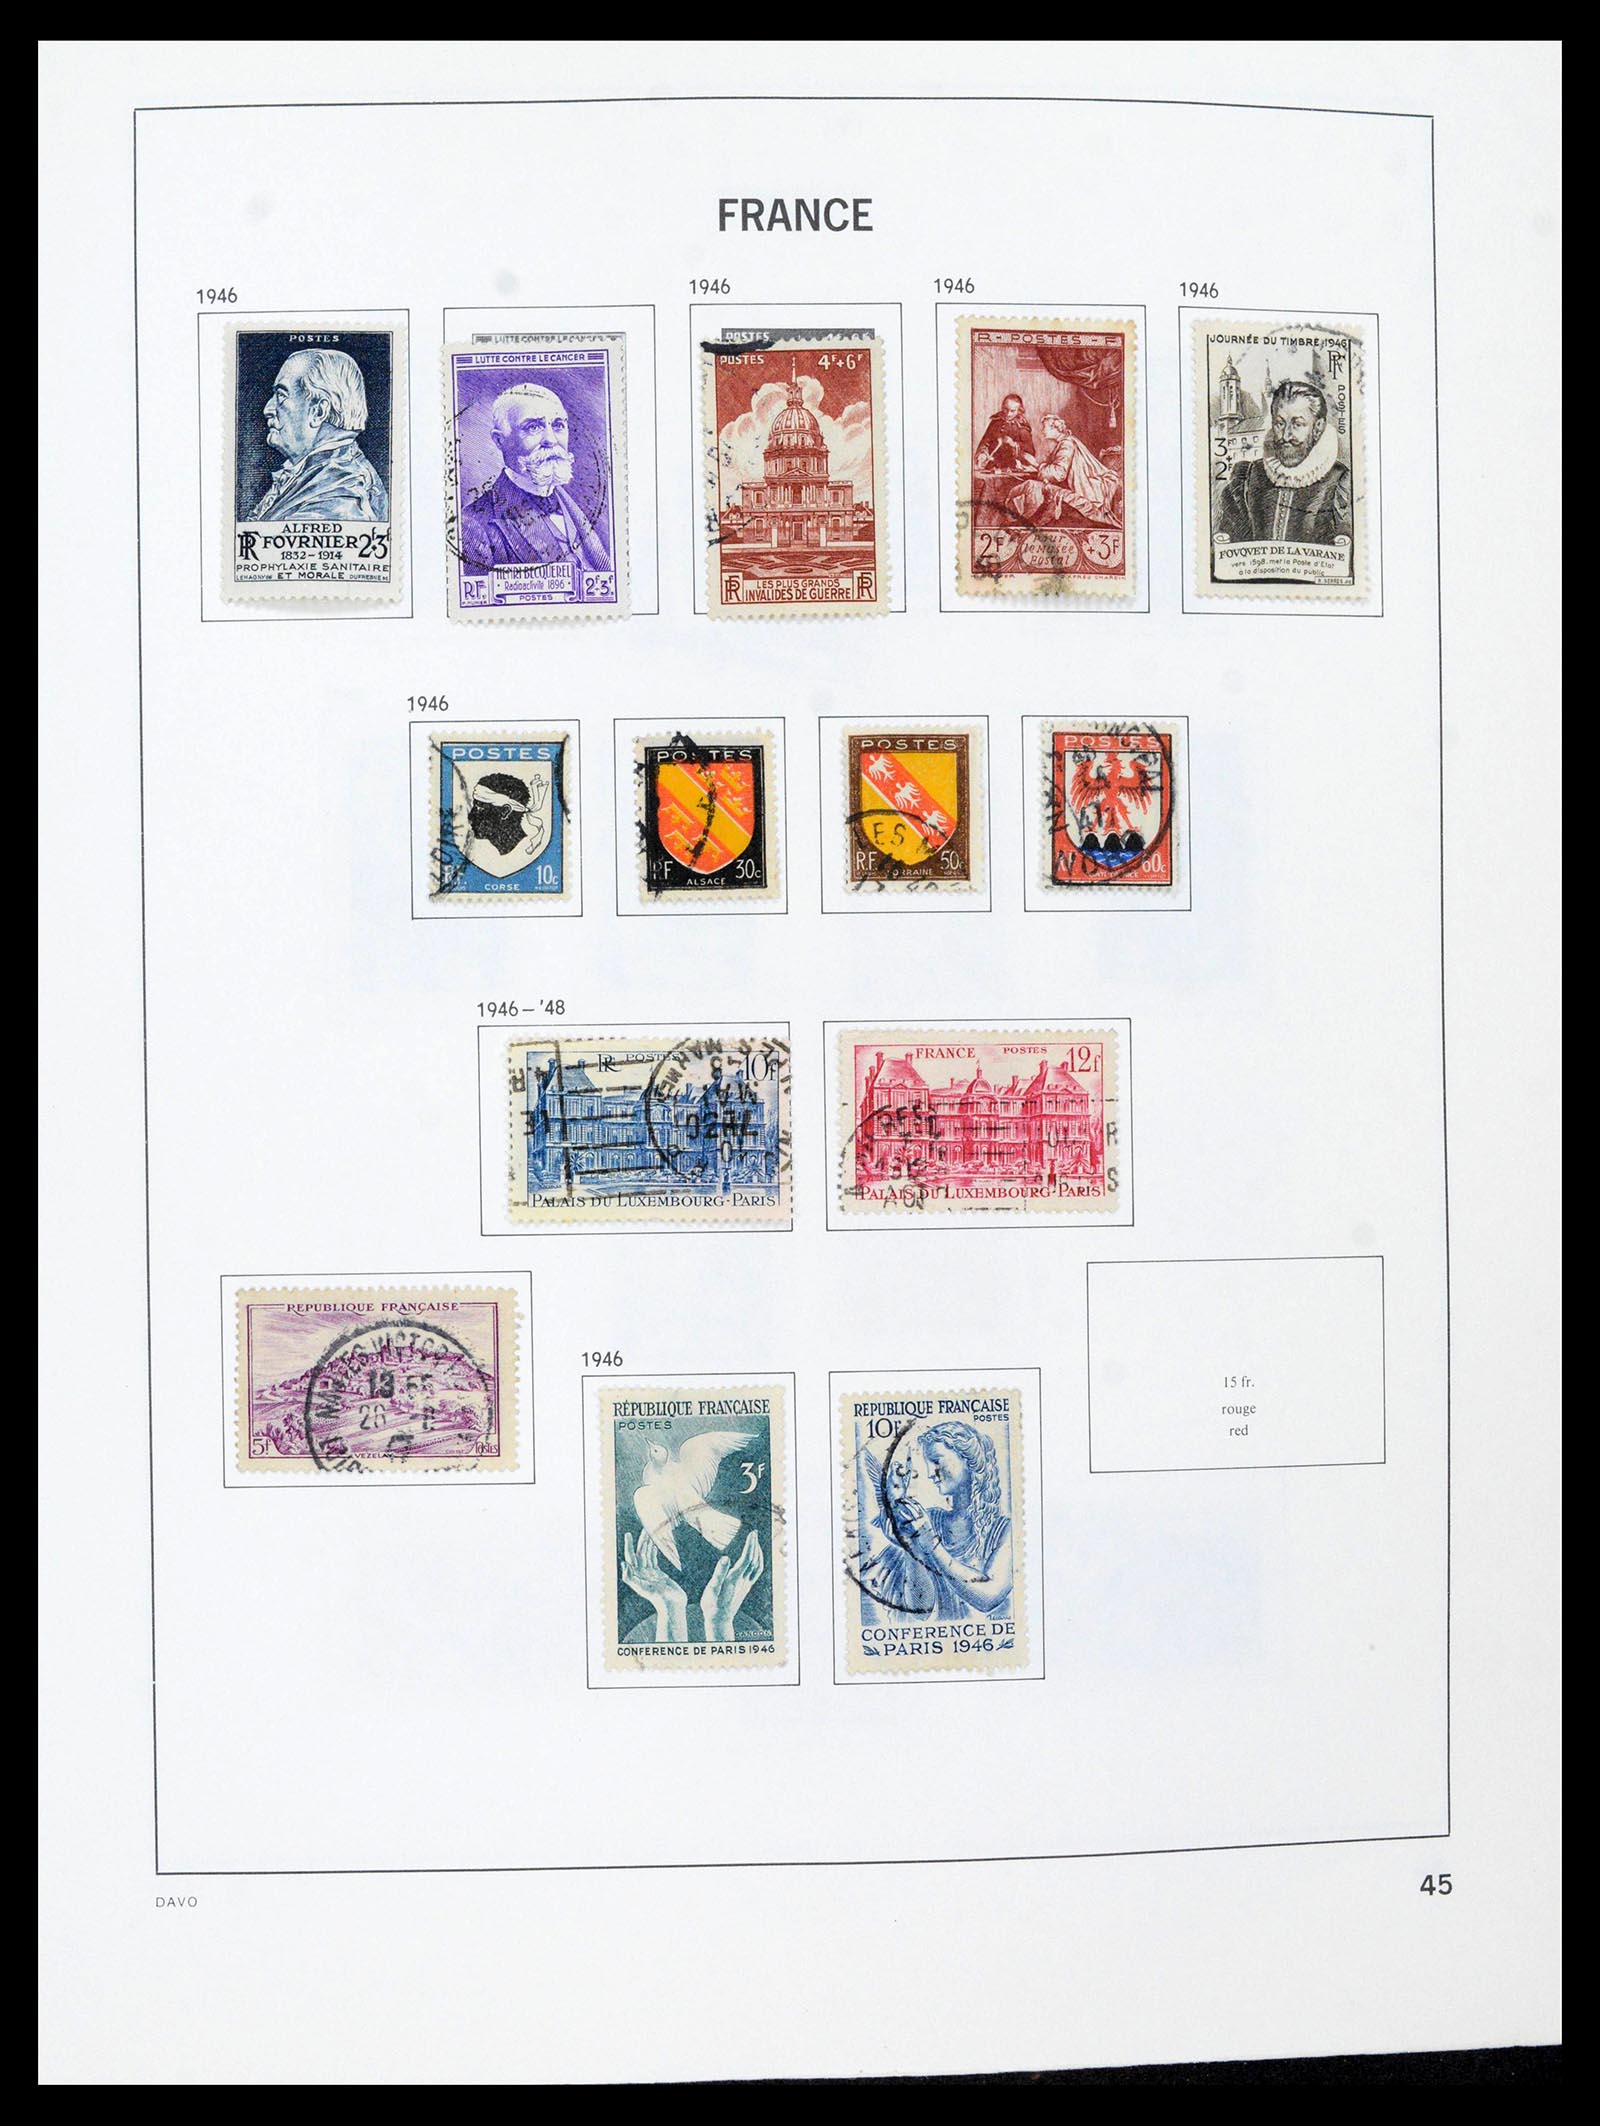 39164 0045 - Stamp collection 39164 France 1849-1981.